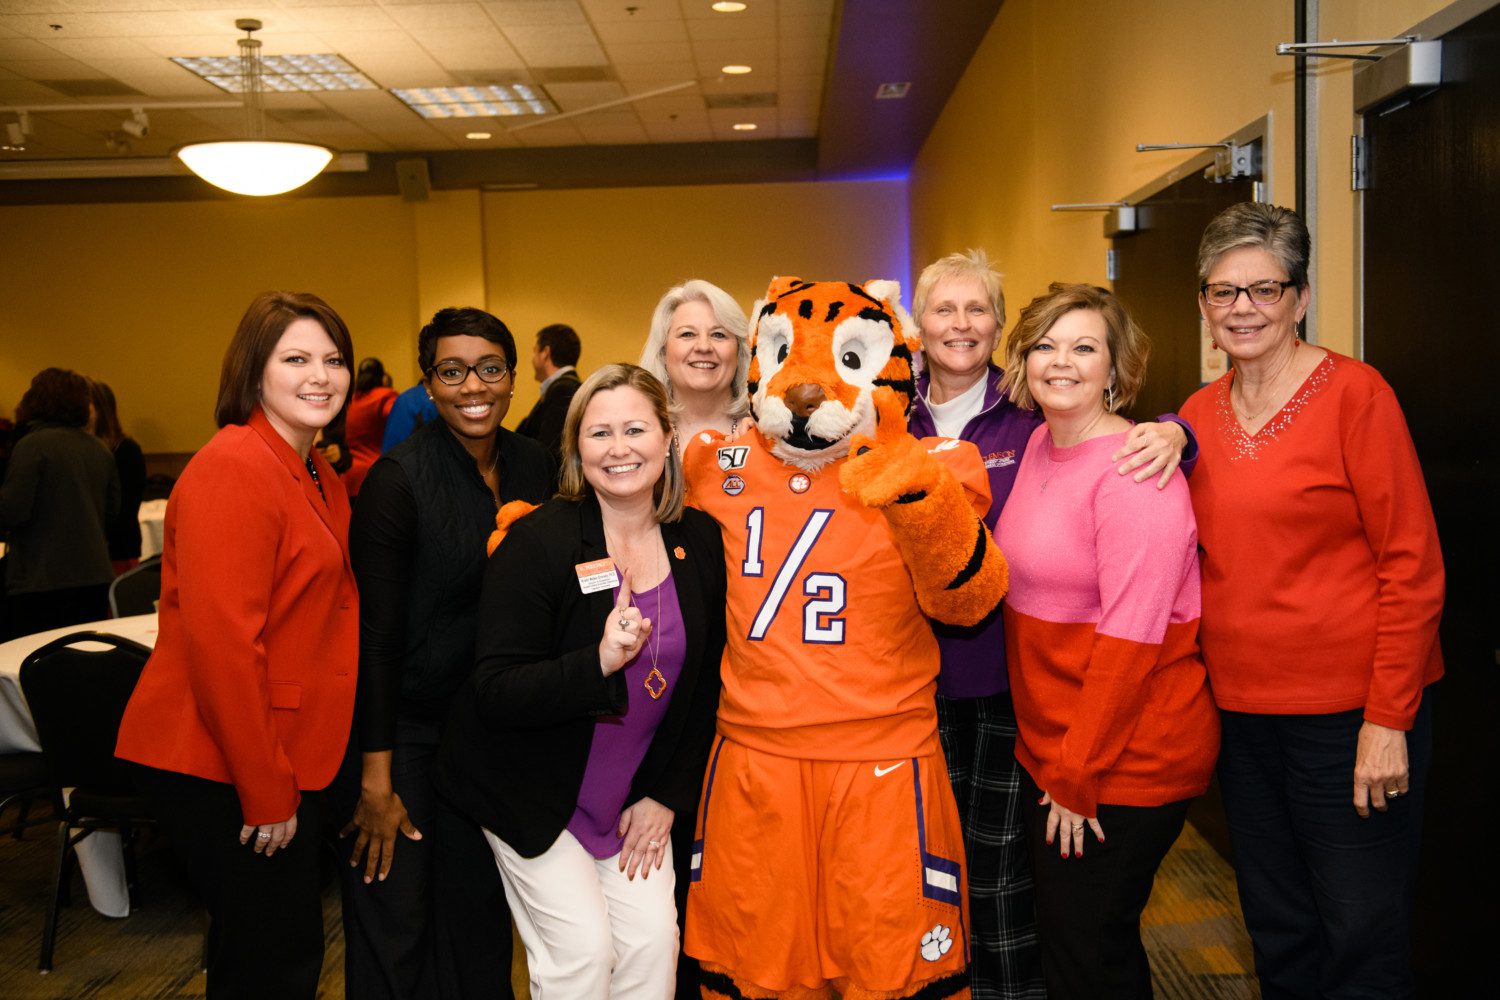 Members of the Student Affairs Business Office pose with the Tiger Cub at the division's winter social on Dec. 4, 2019